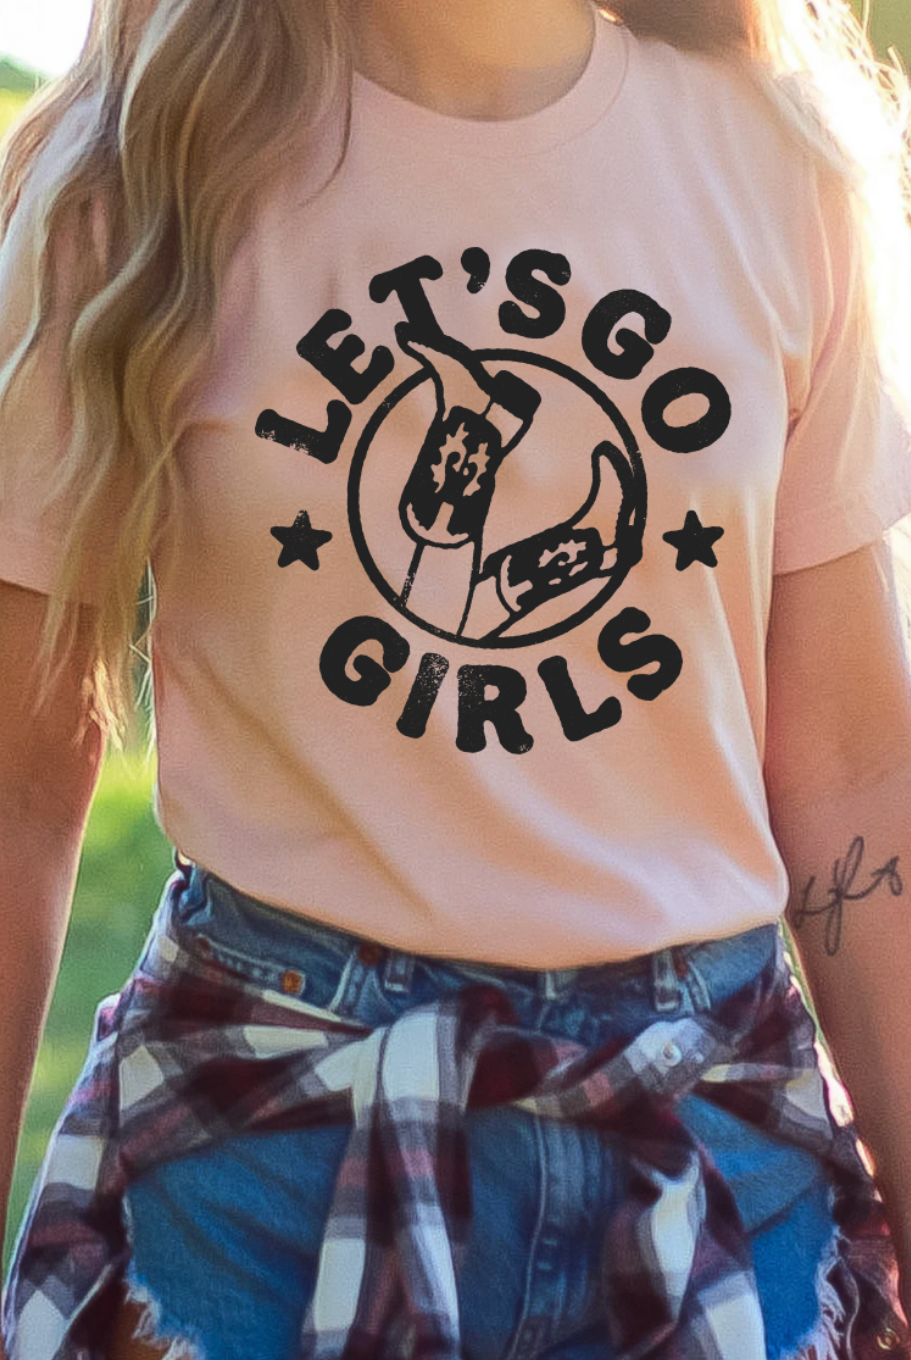 Let's Go Girls, Vintage, Country, Western, Distressed, Bella and Canvas, Hand-made apparel, Shipped from Texas, Peach Unisex Shirt.